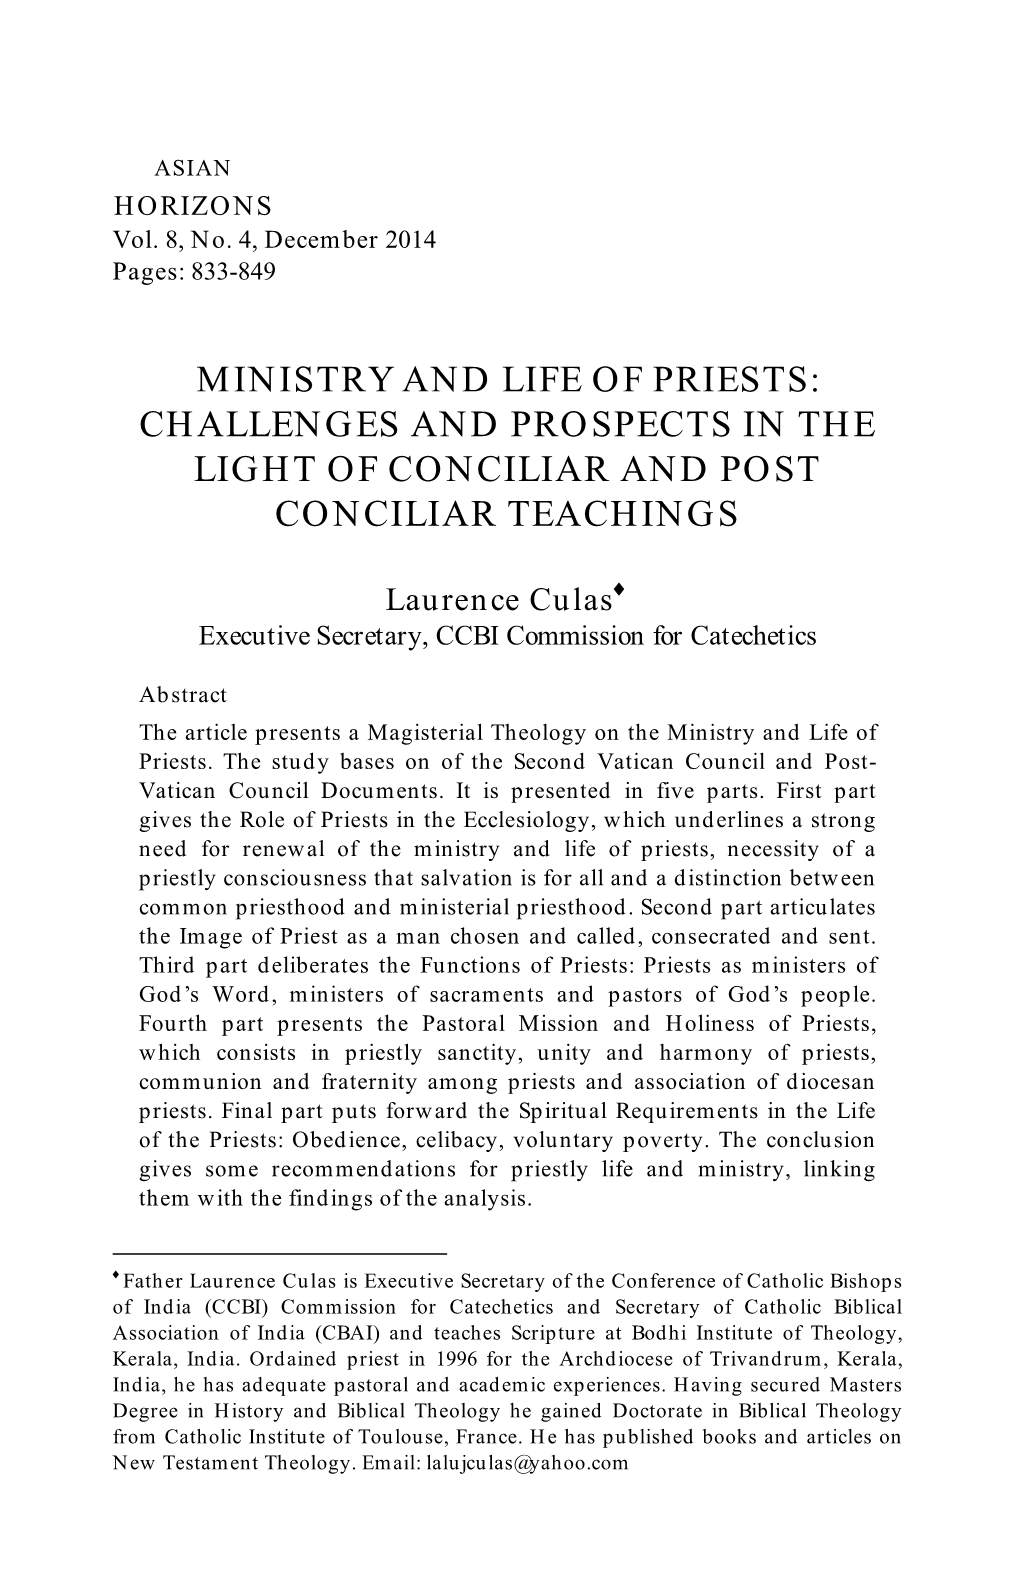 Ministry and Life of Priests: Challenges and Prospects in the Light of Conciliar and Post Conciliar Teachings